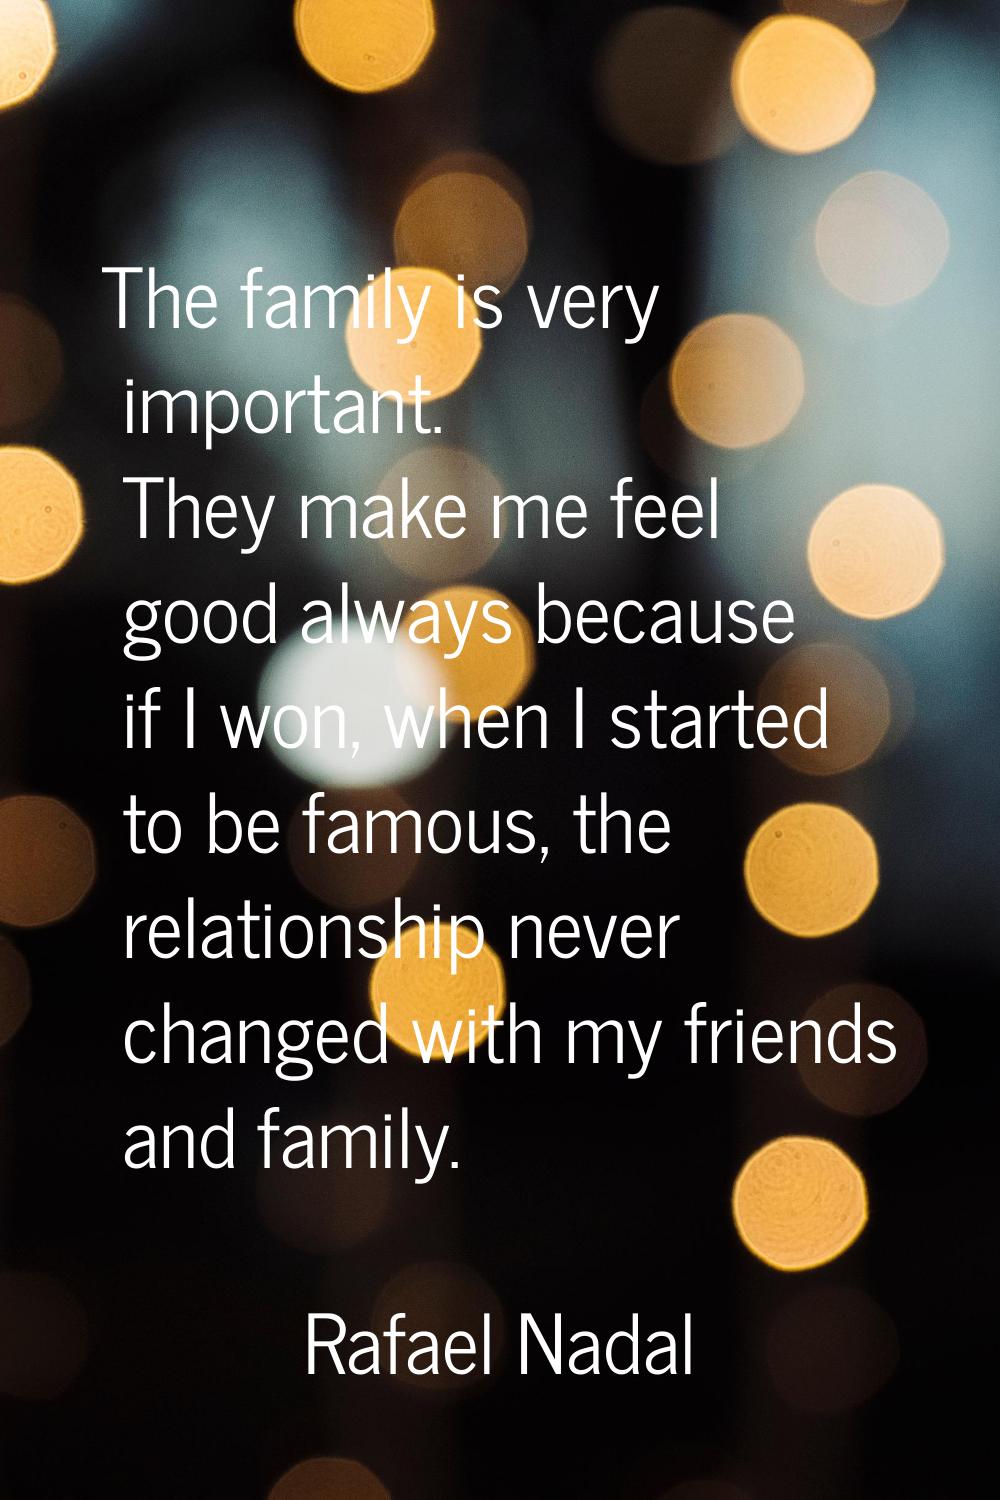 The family is very important. They make me feel good always because if I won, when I started to be 